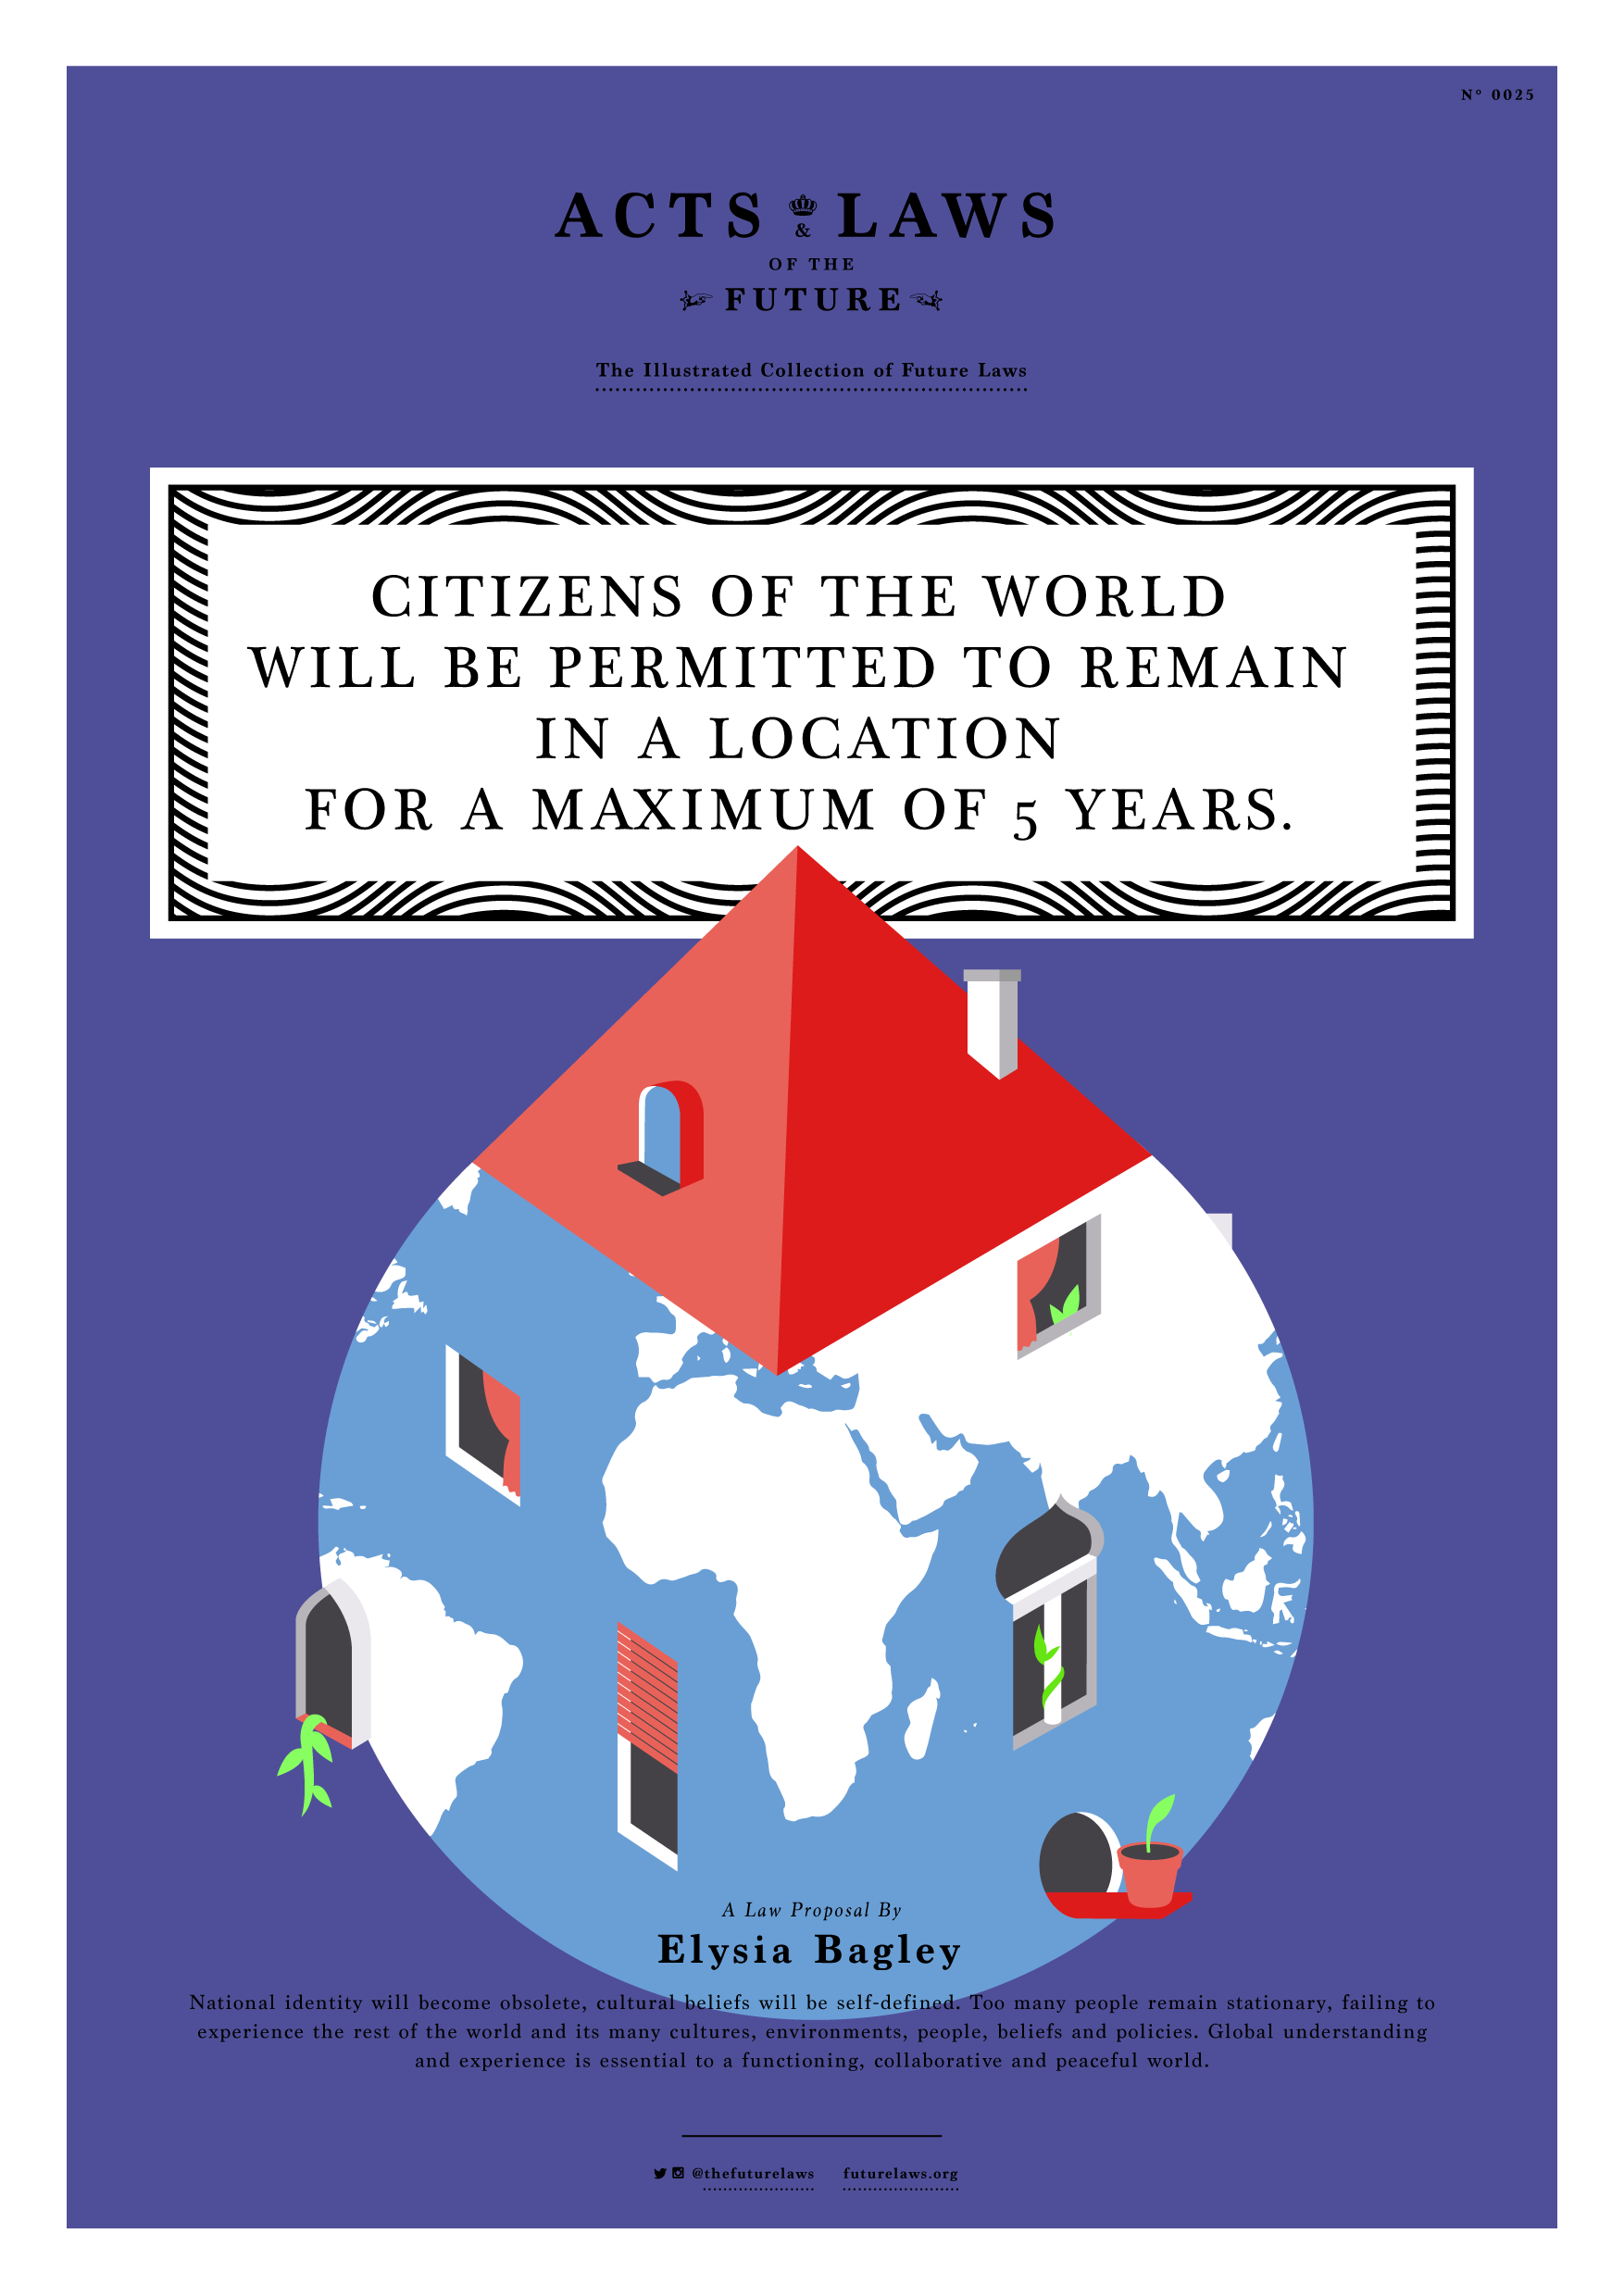 Citizens of the world will be permitted to remain in a location for a maximum of 5 years. 